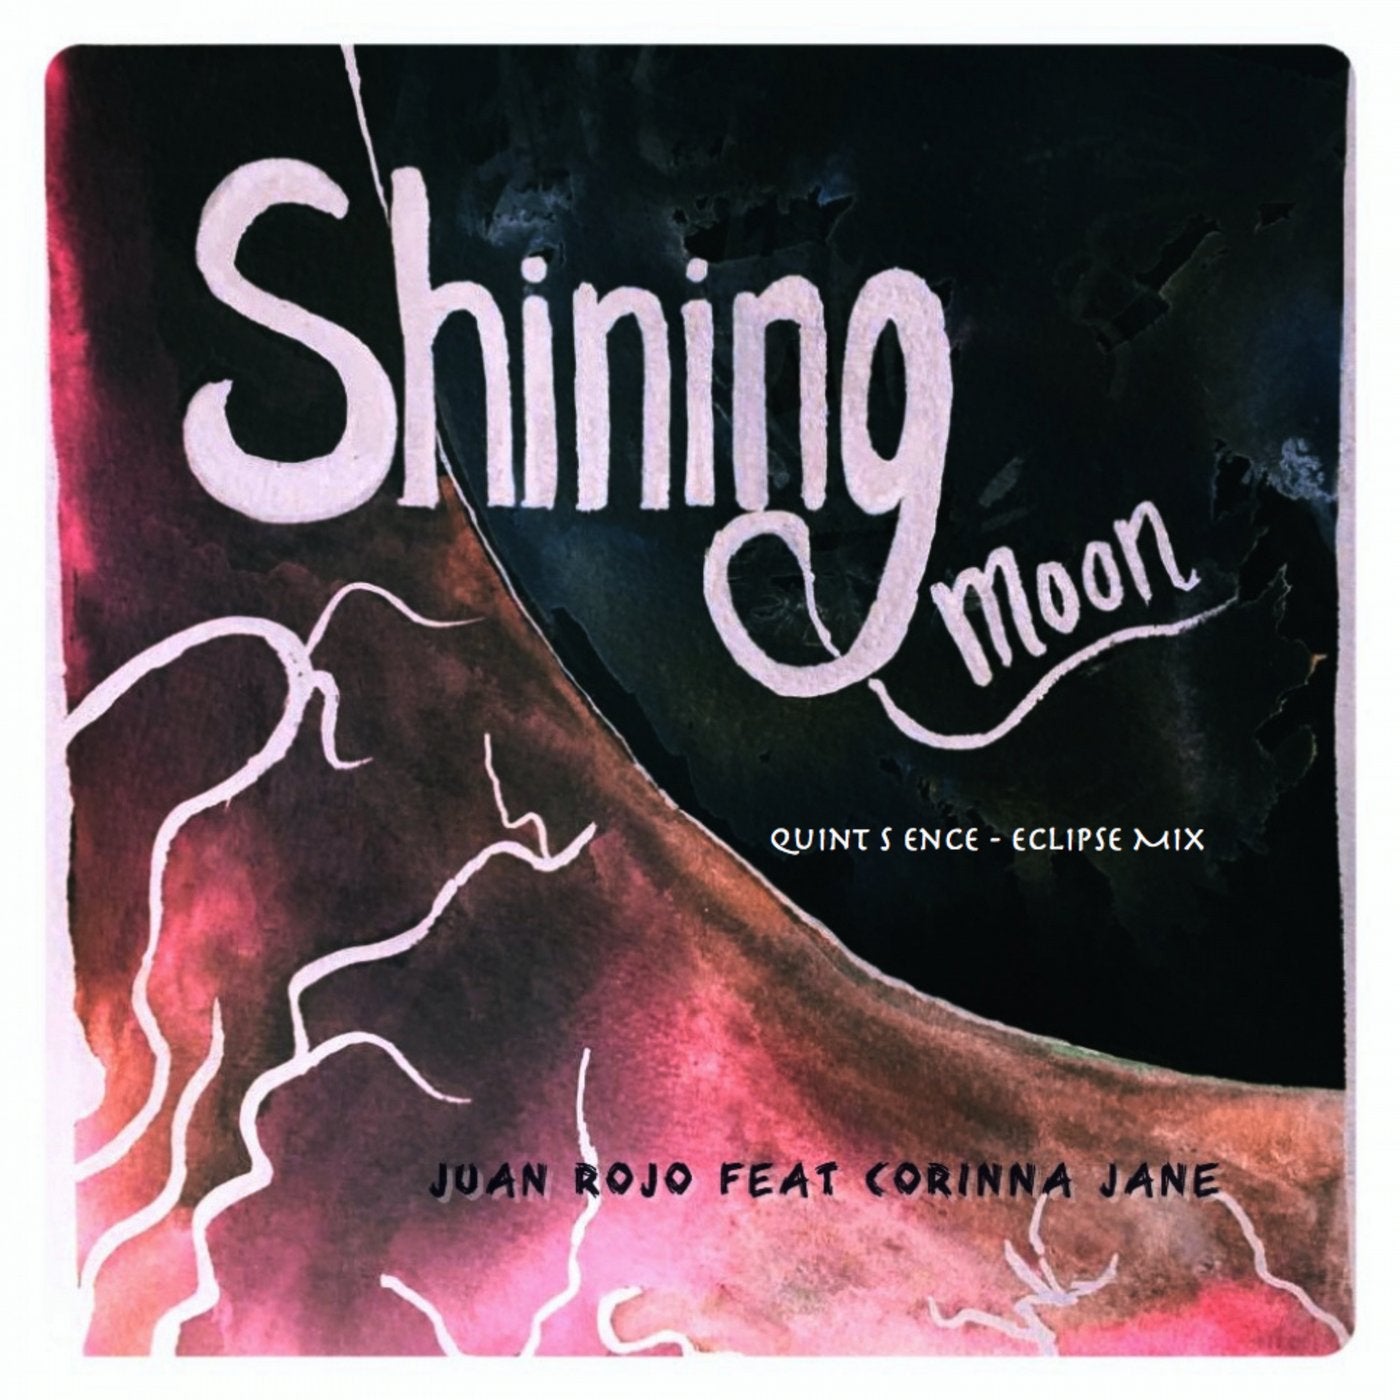 Shining Moon (Quint S Ence Eclipse Mix)